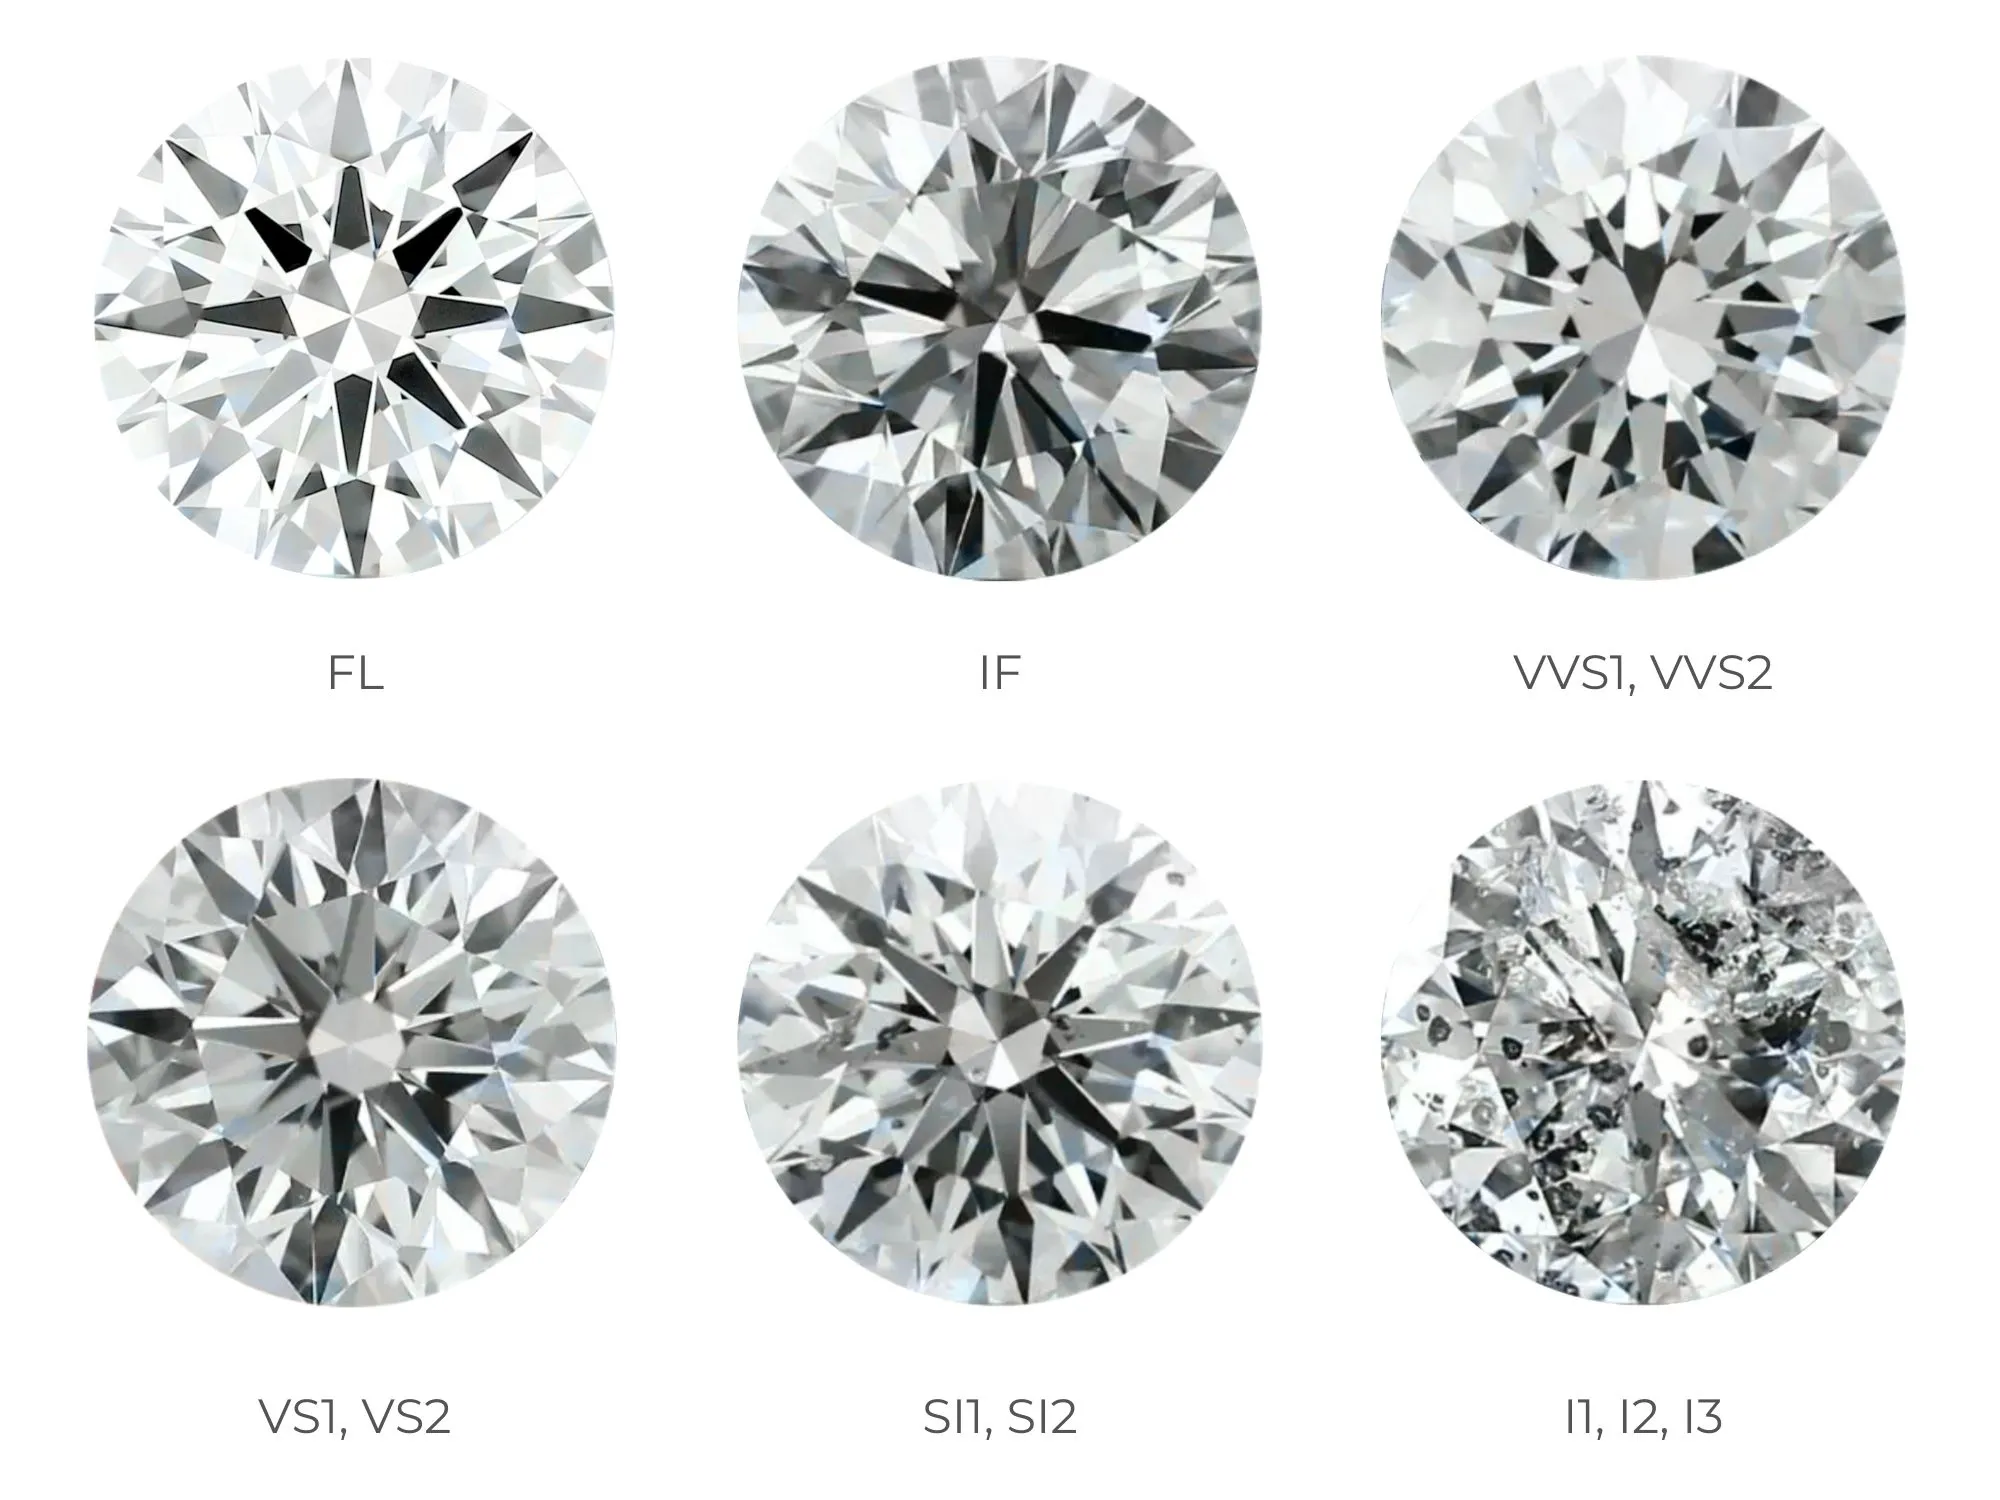 Does a diamond contain impurities? Or is it a flawless pure stone?